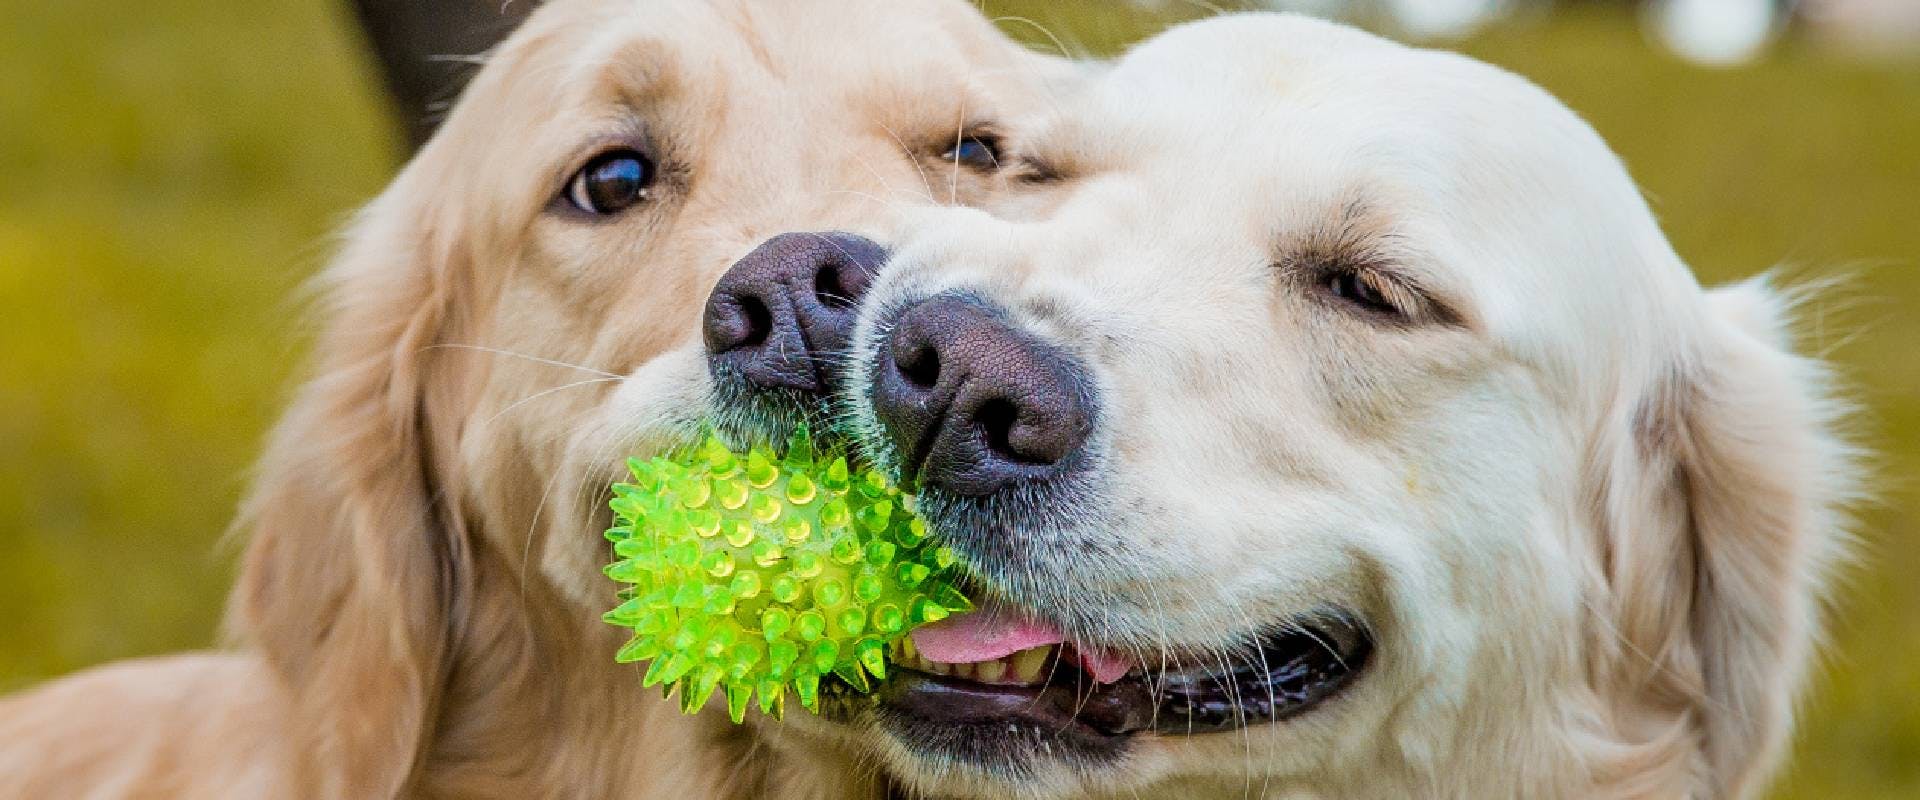 A close-up of two Golden Retrievers playing with a toy